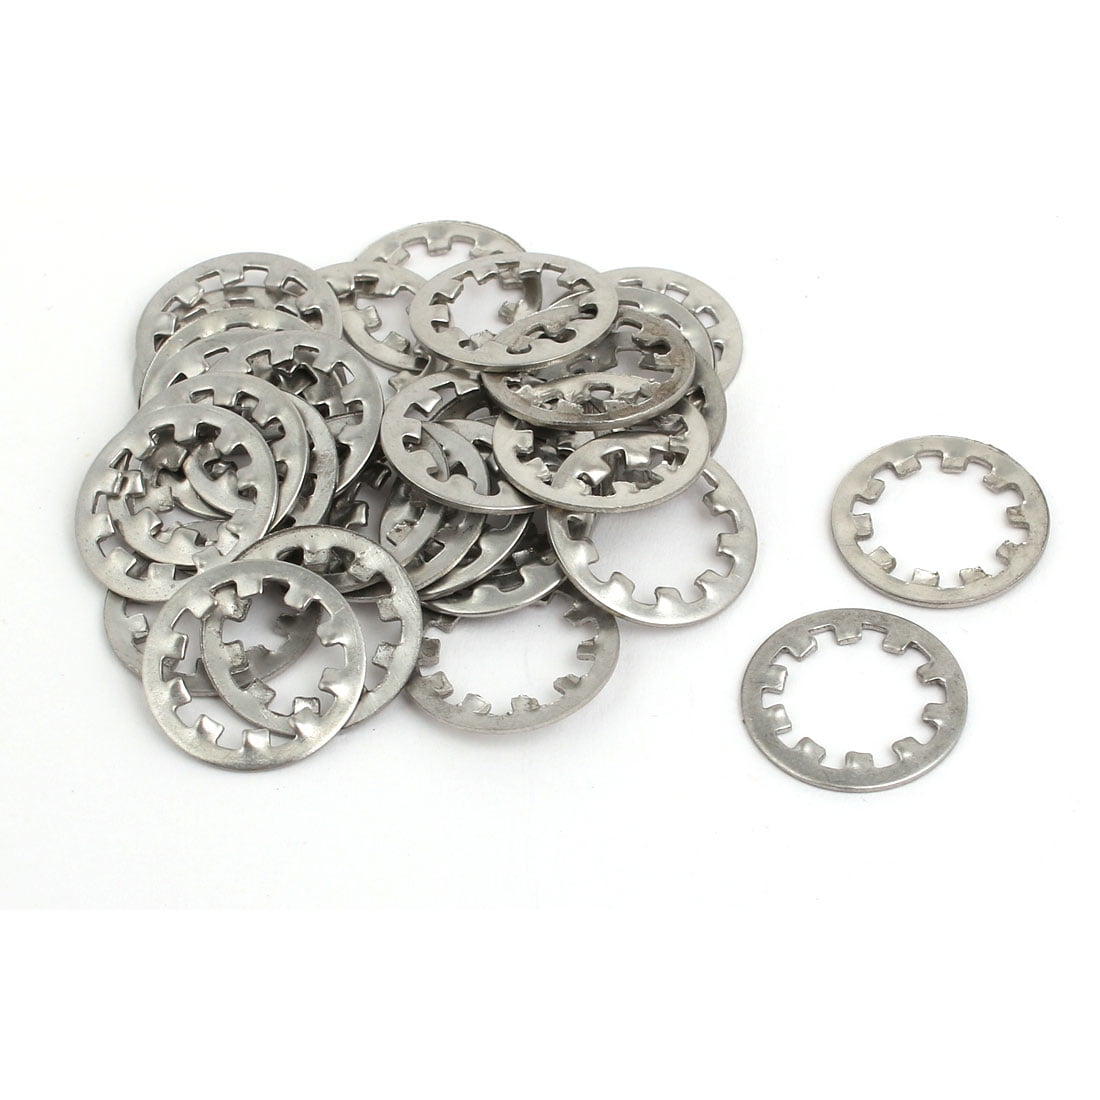 12mm Inner Dia Stainless Steel Internal Tooth Lock Washer Silver Tone 30pcs 